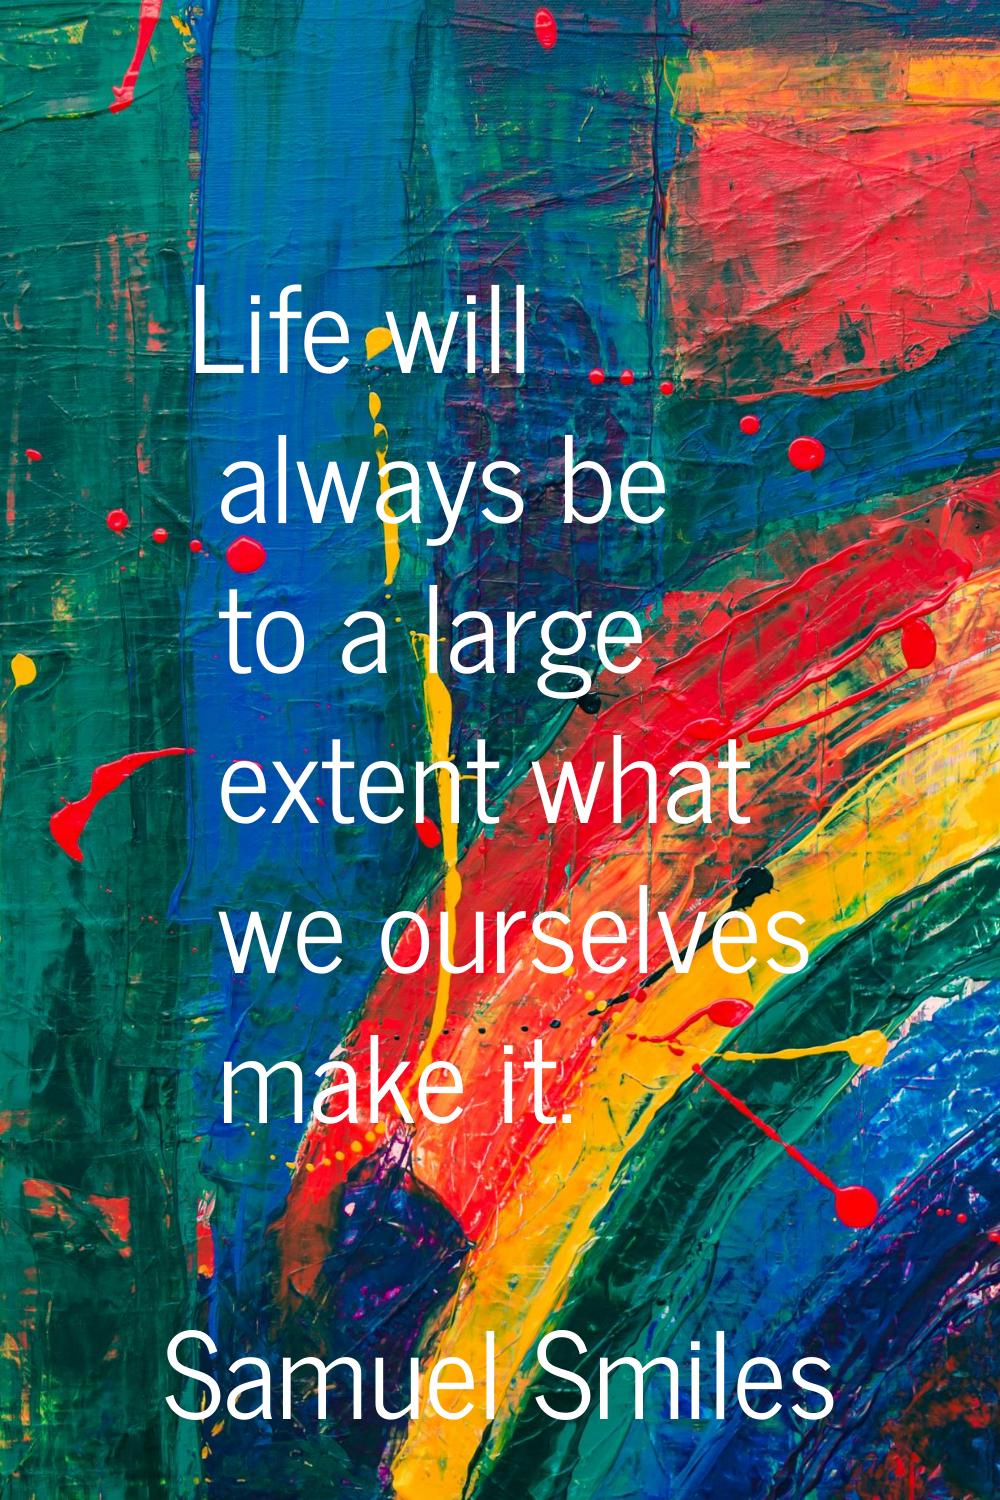 Life will always be to a large extent what we ourselves make it.